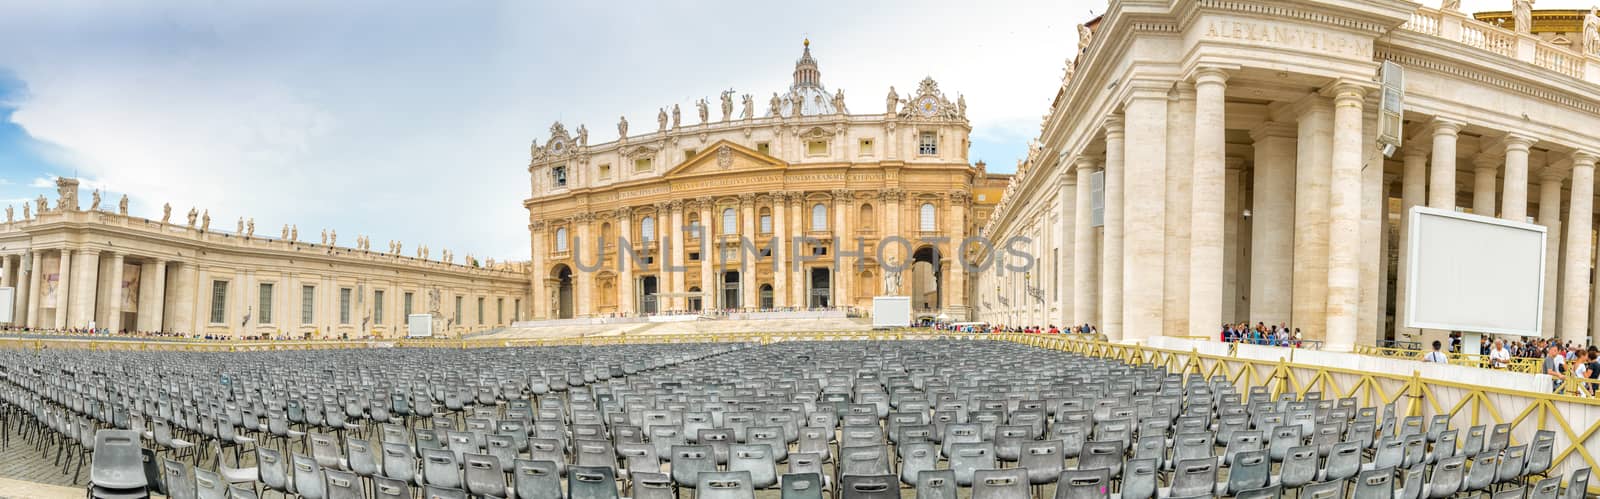 Panoramic view of St. Peter Square, Vatican City.